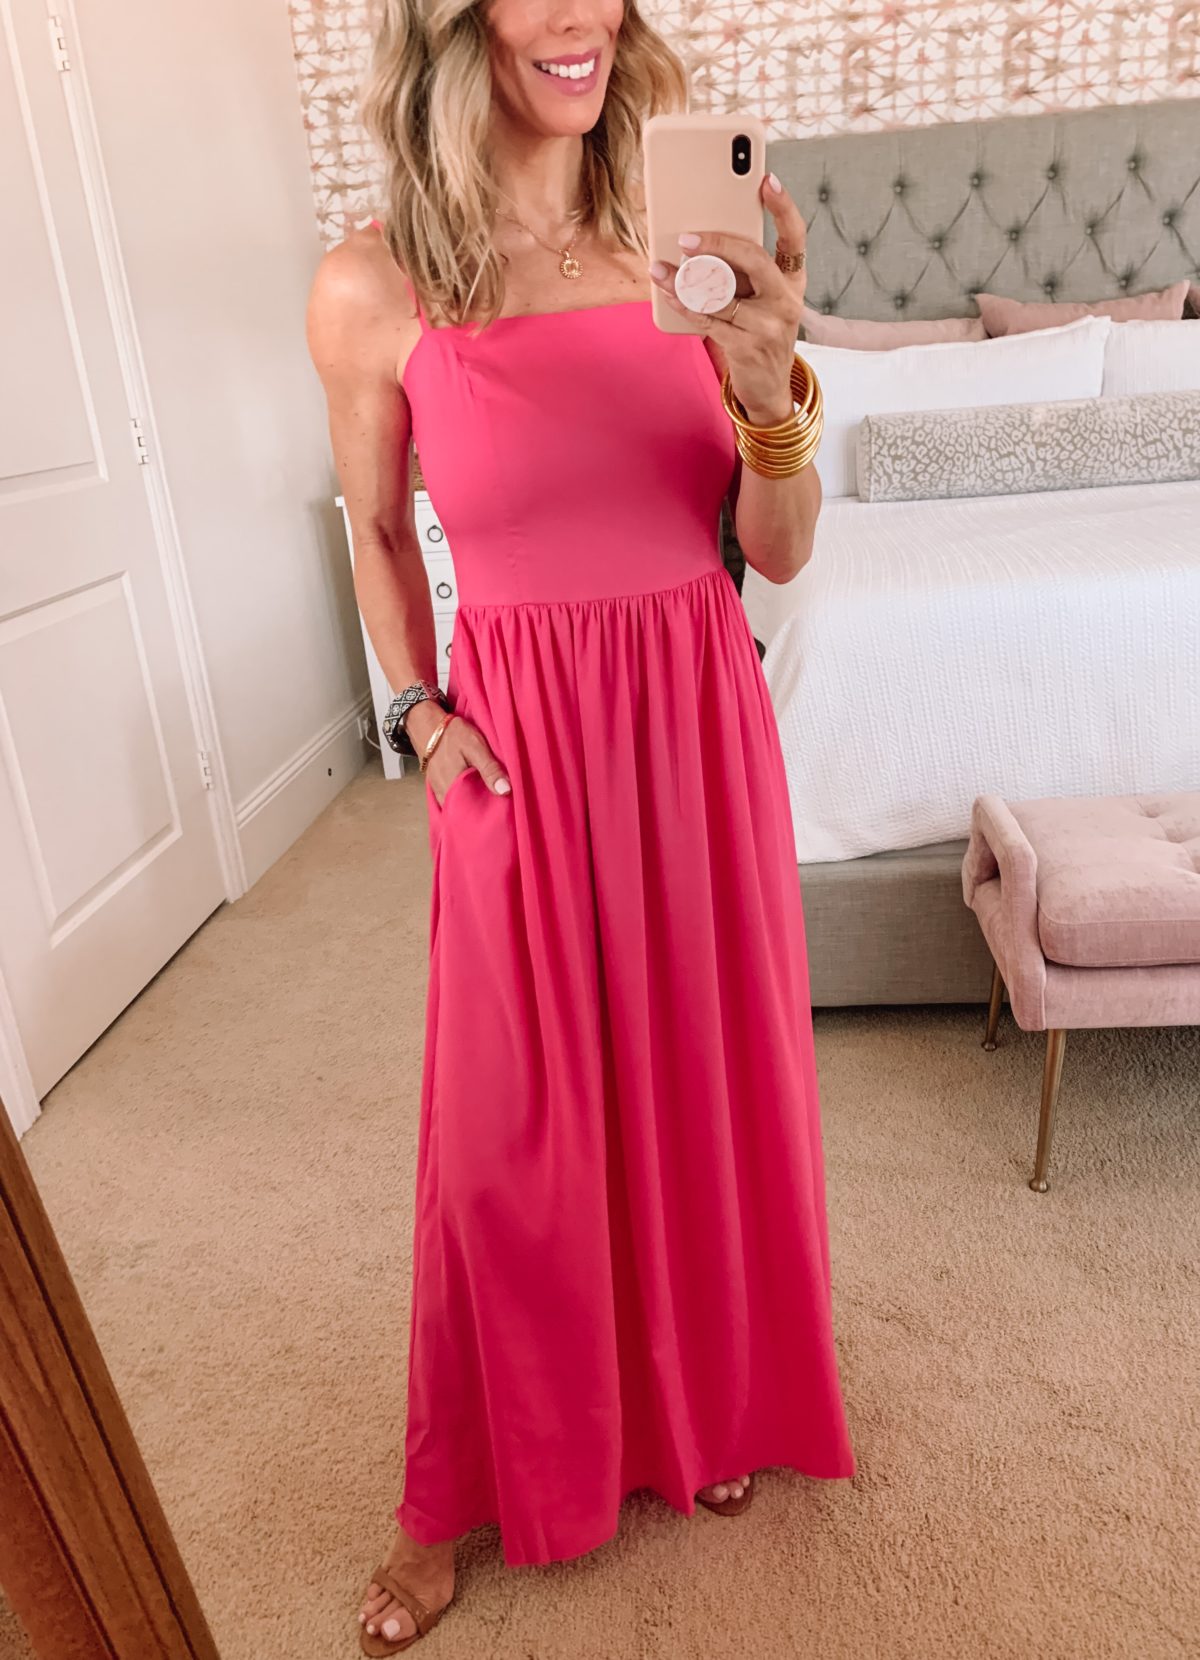 Amazon Fashion Faves, Pink Maxi Dress with Sandals